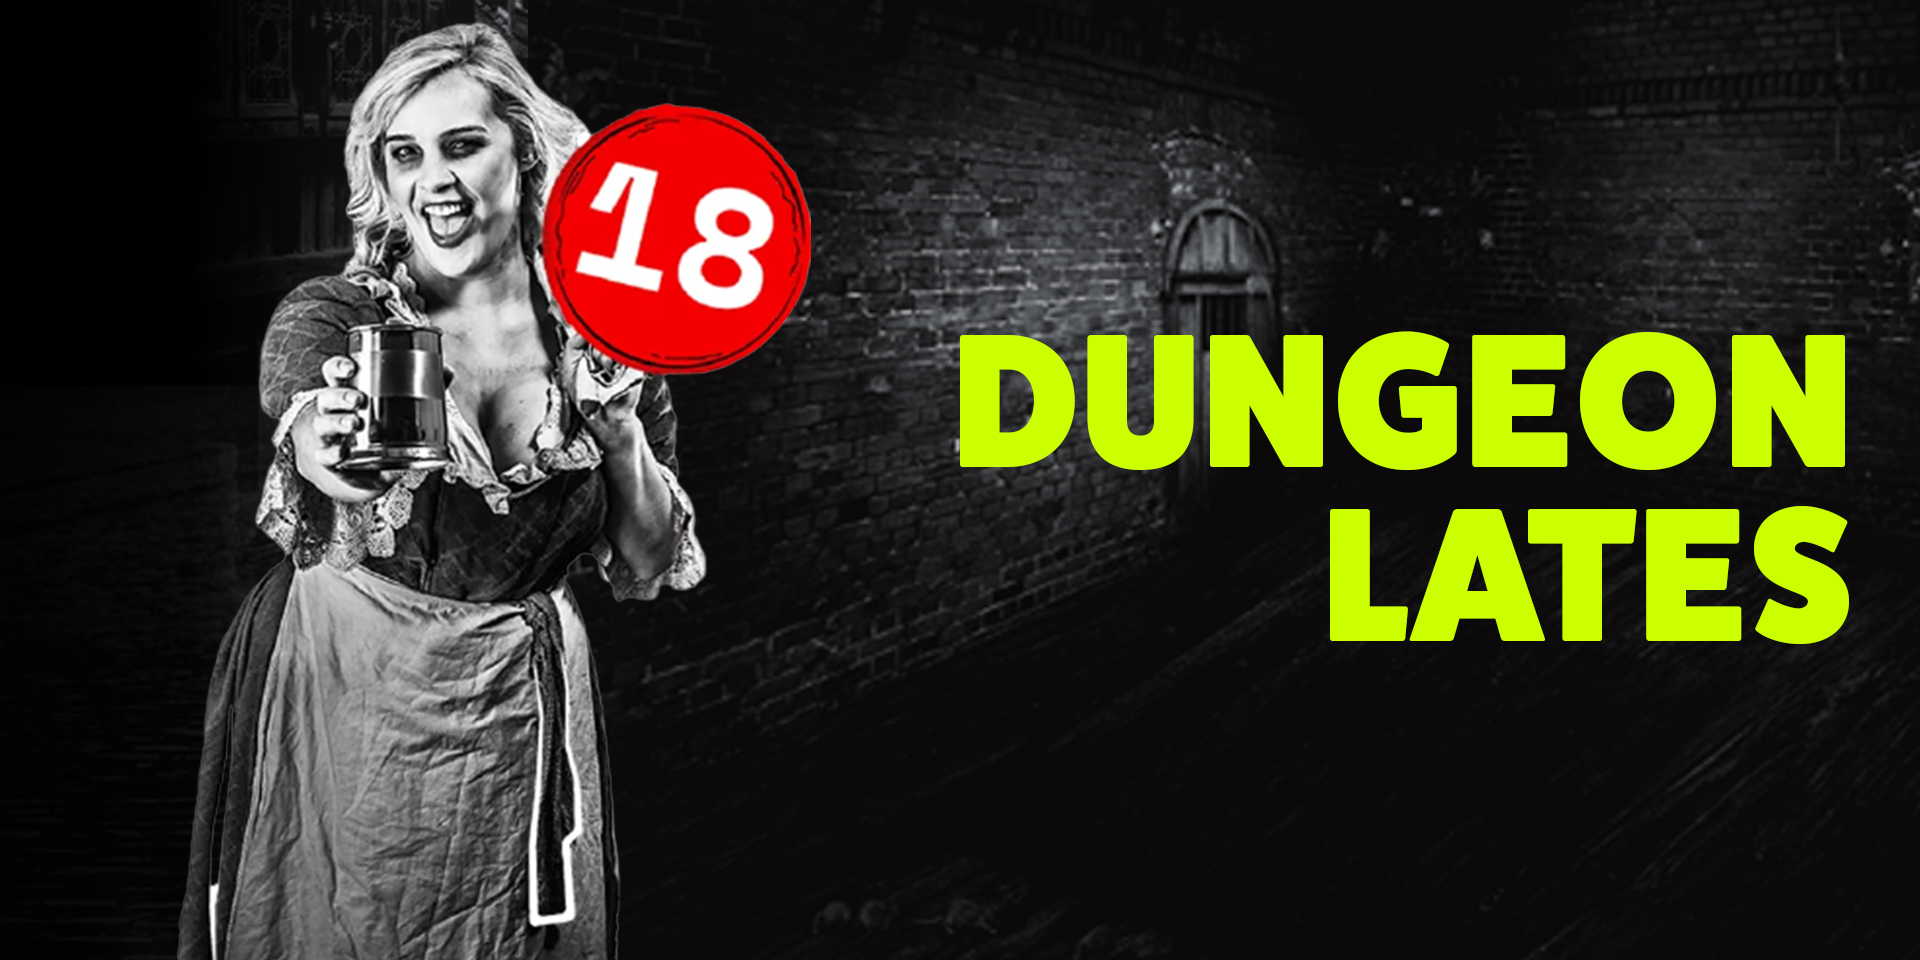 Dungeon Lates